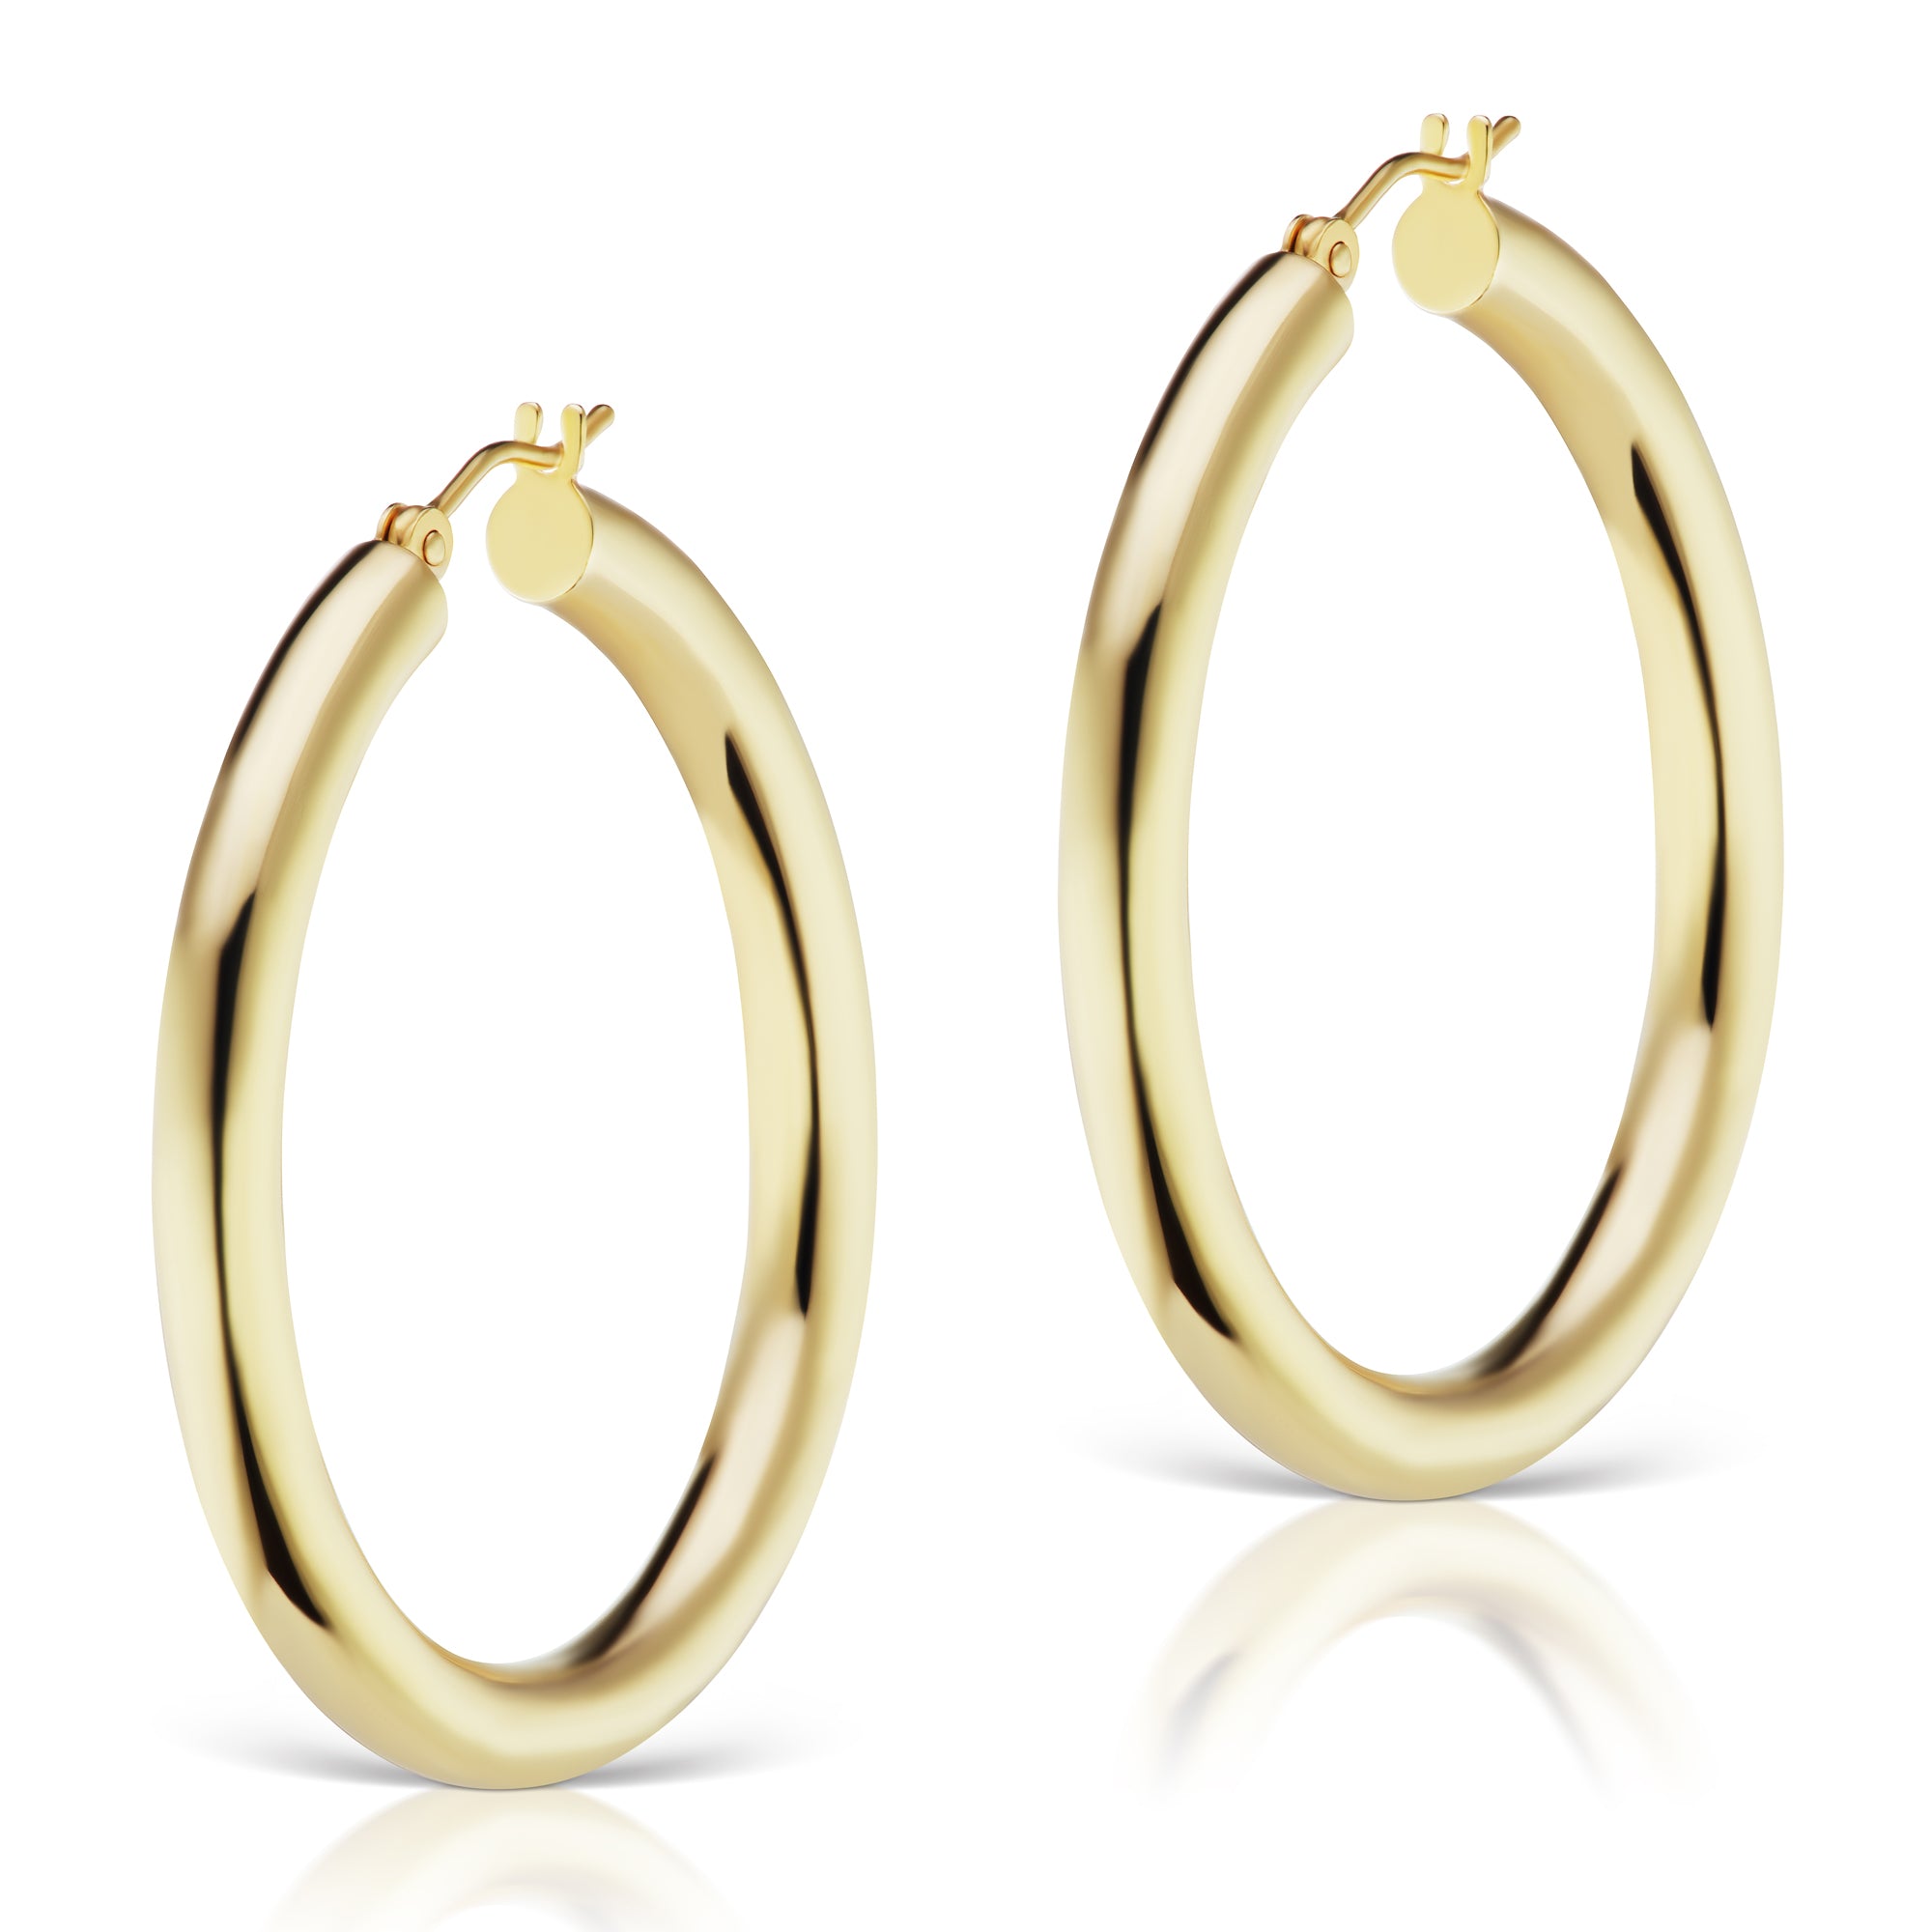 The Gold Heather Hollow Hoops